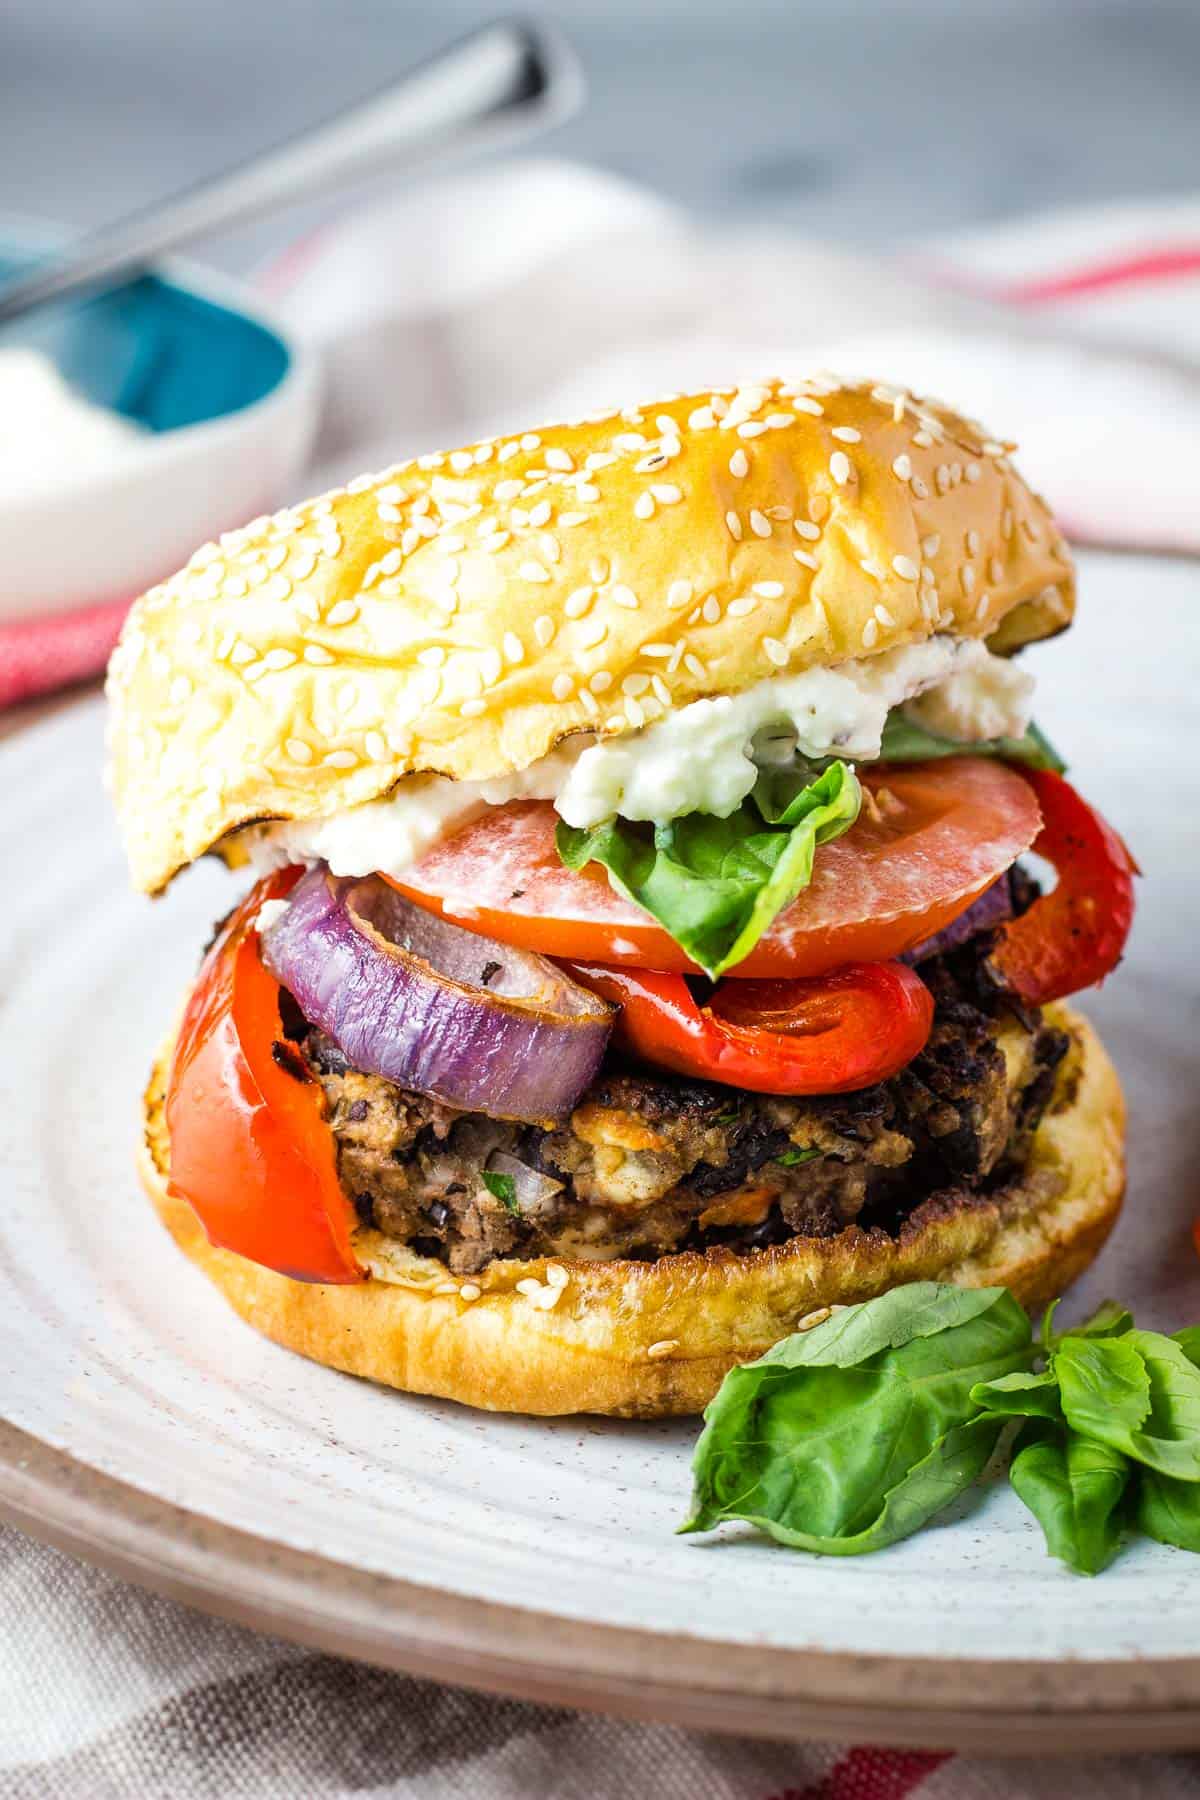 Meal plan ideas using August produce: Spice up your burgers with red peppers with this recipe from Our Happy Mess